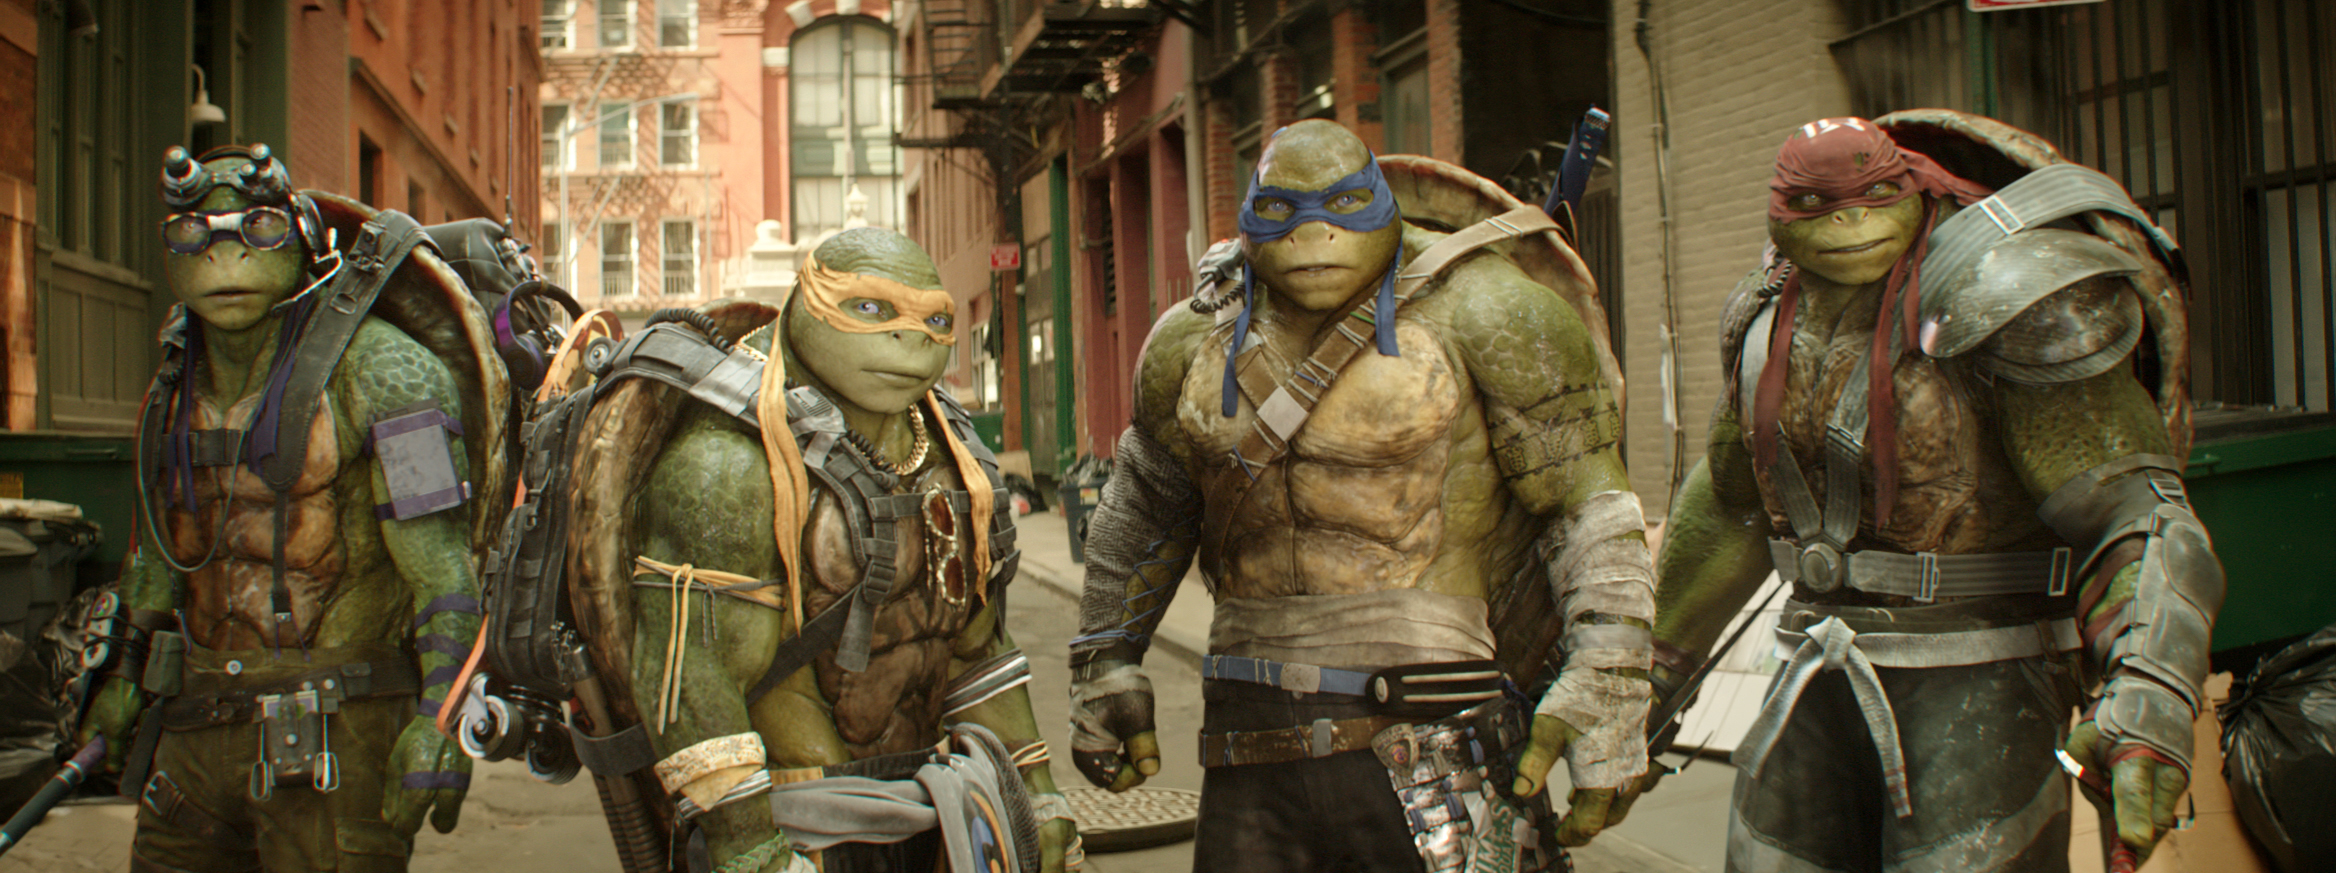 This image released by Paramount Pictures shows, from left, Donatello, Michelangelo, Leonardo and Raphael in a scene from "Teenage Mutant Ninja Turtles: Out of the Shadows." The movie opened to $35.3 million according to comScore estimates Sunday, June 5, 2016, close to half of what the first film opened to in 2014. (Lula Carvalho/Paramount Pictures via AP)